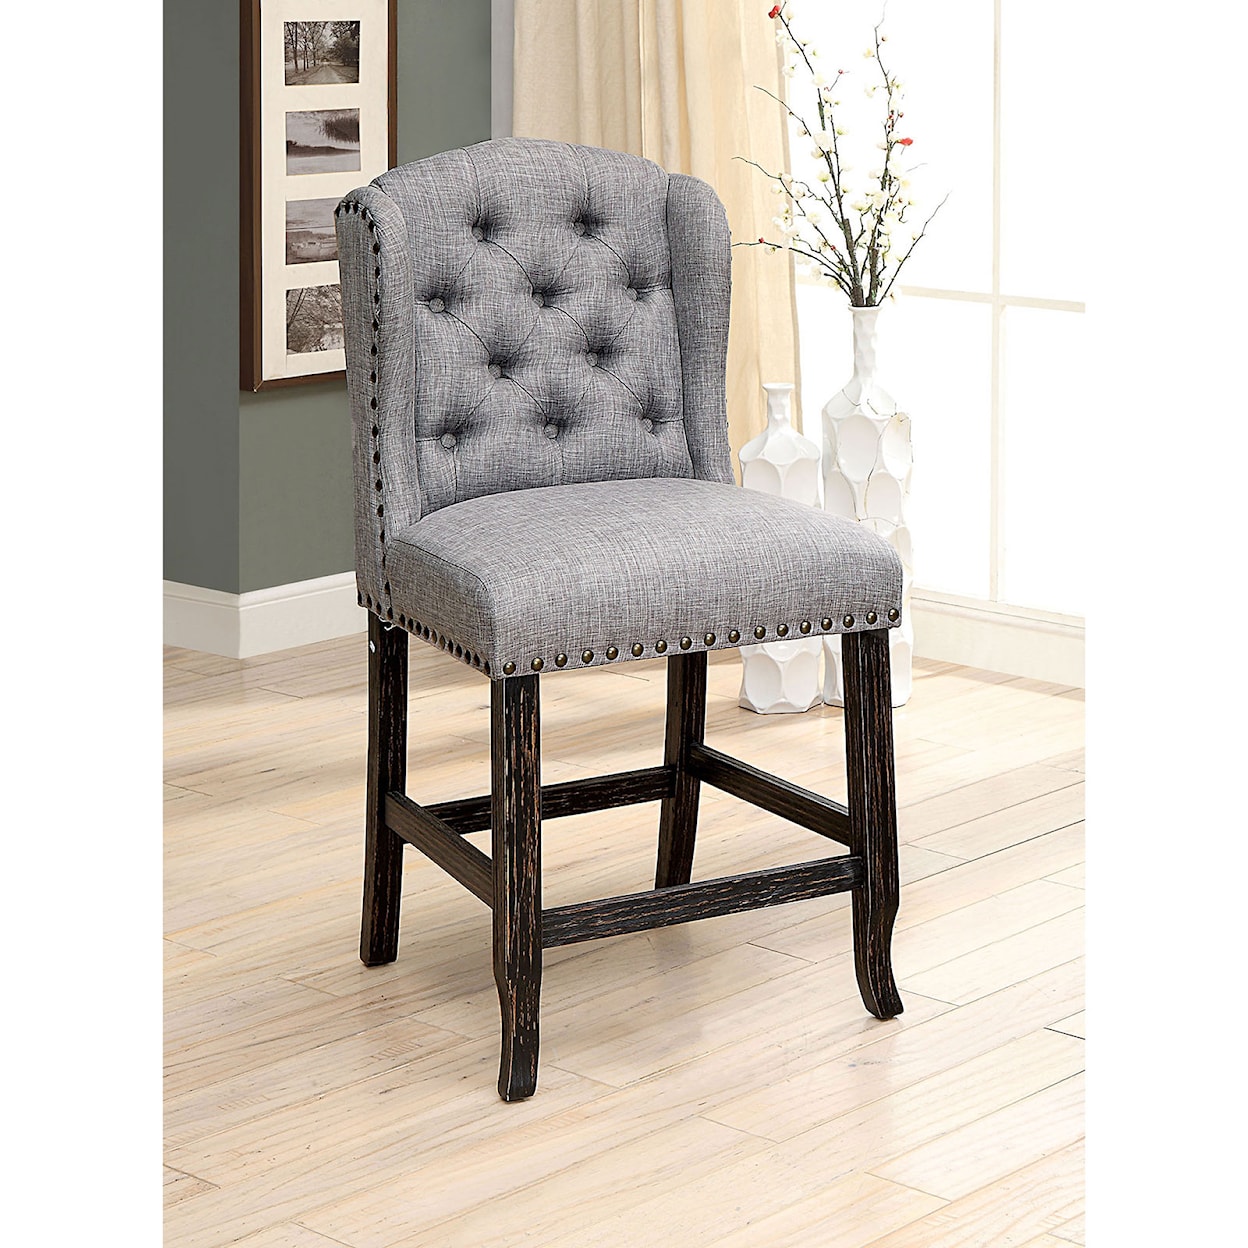 Furniture of America Sania III Wing Back Counter Height Chair